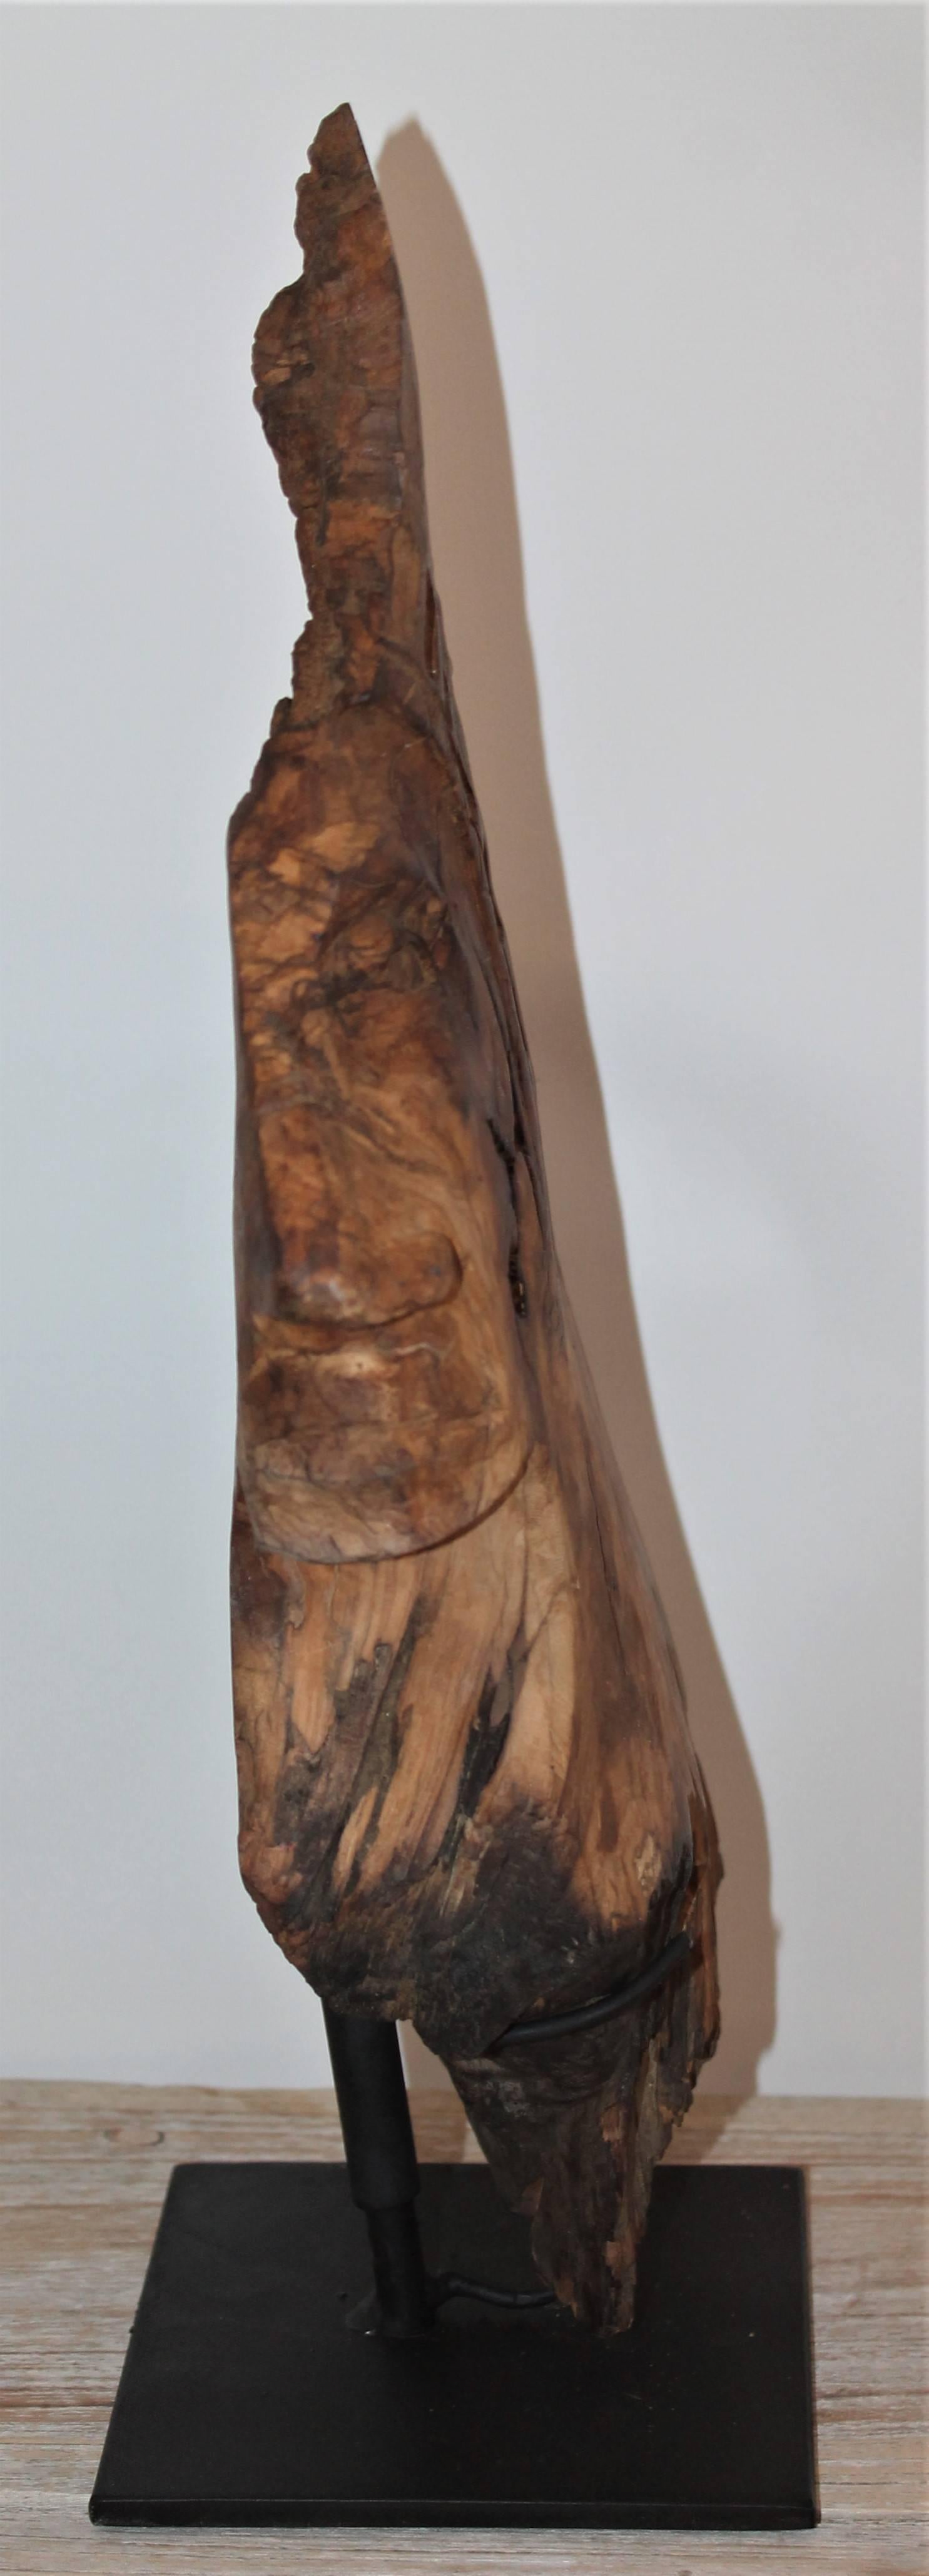 Hand-Carved Indian Head of Wood 1